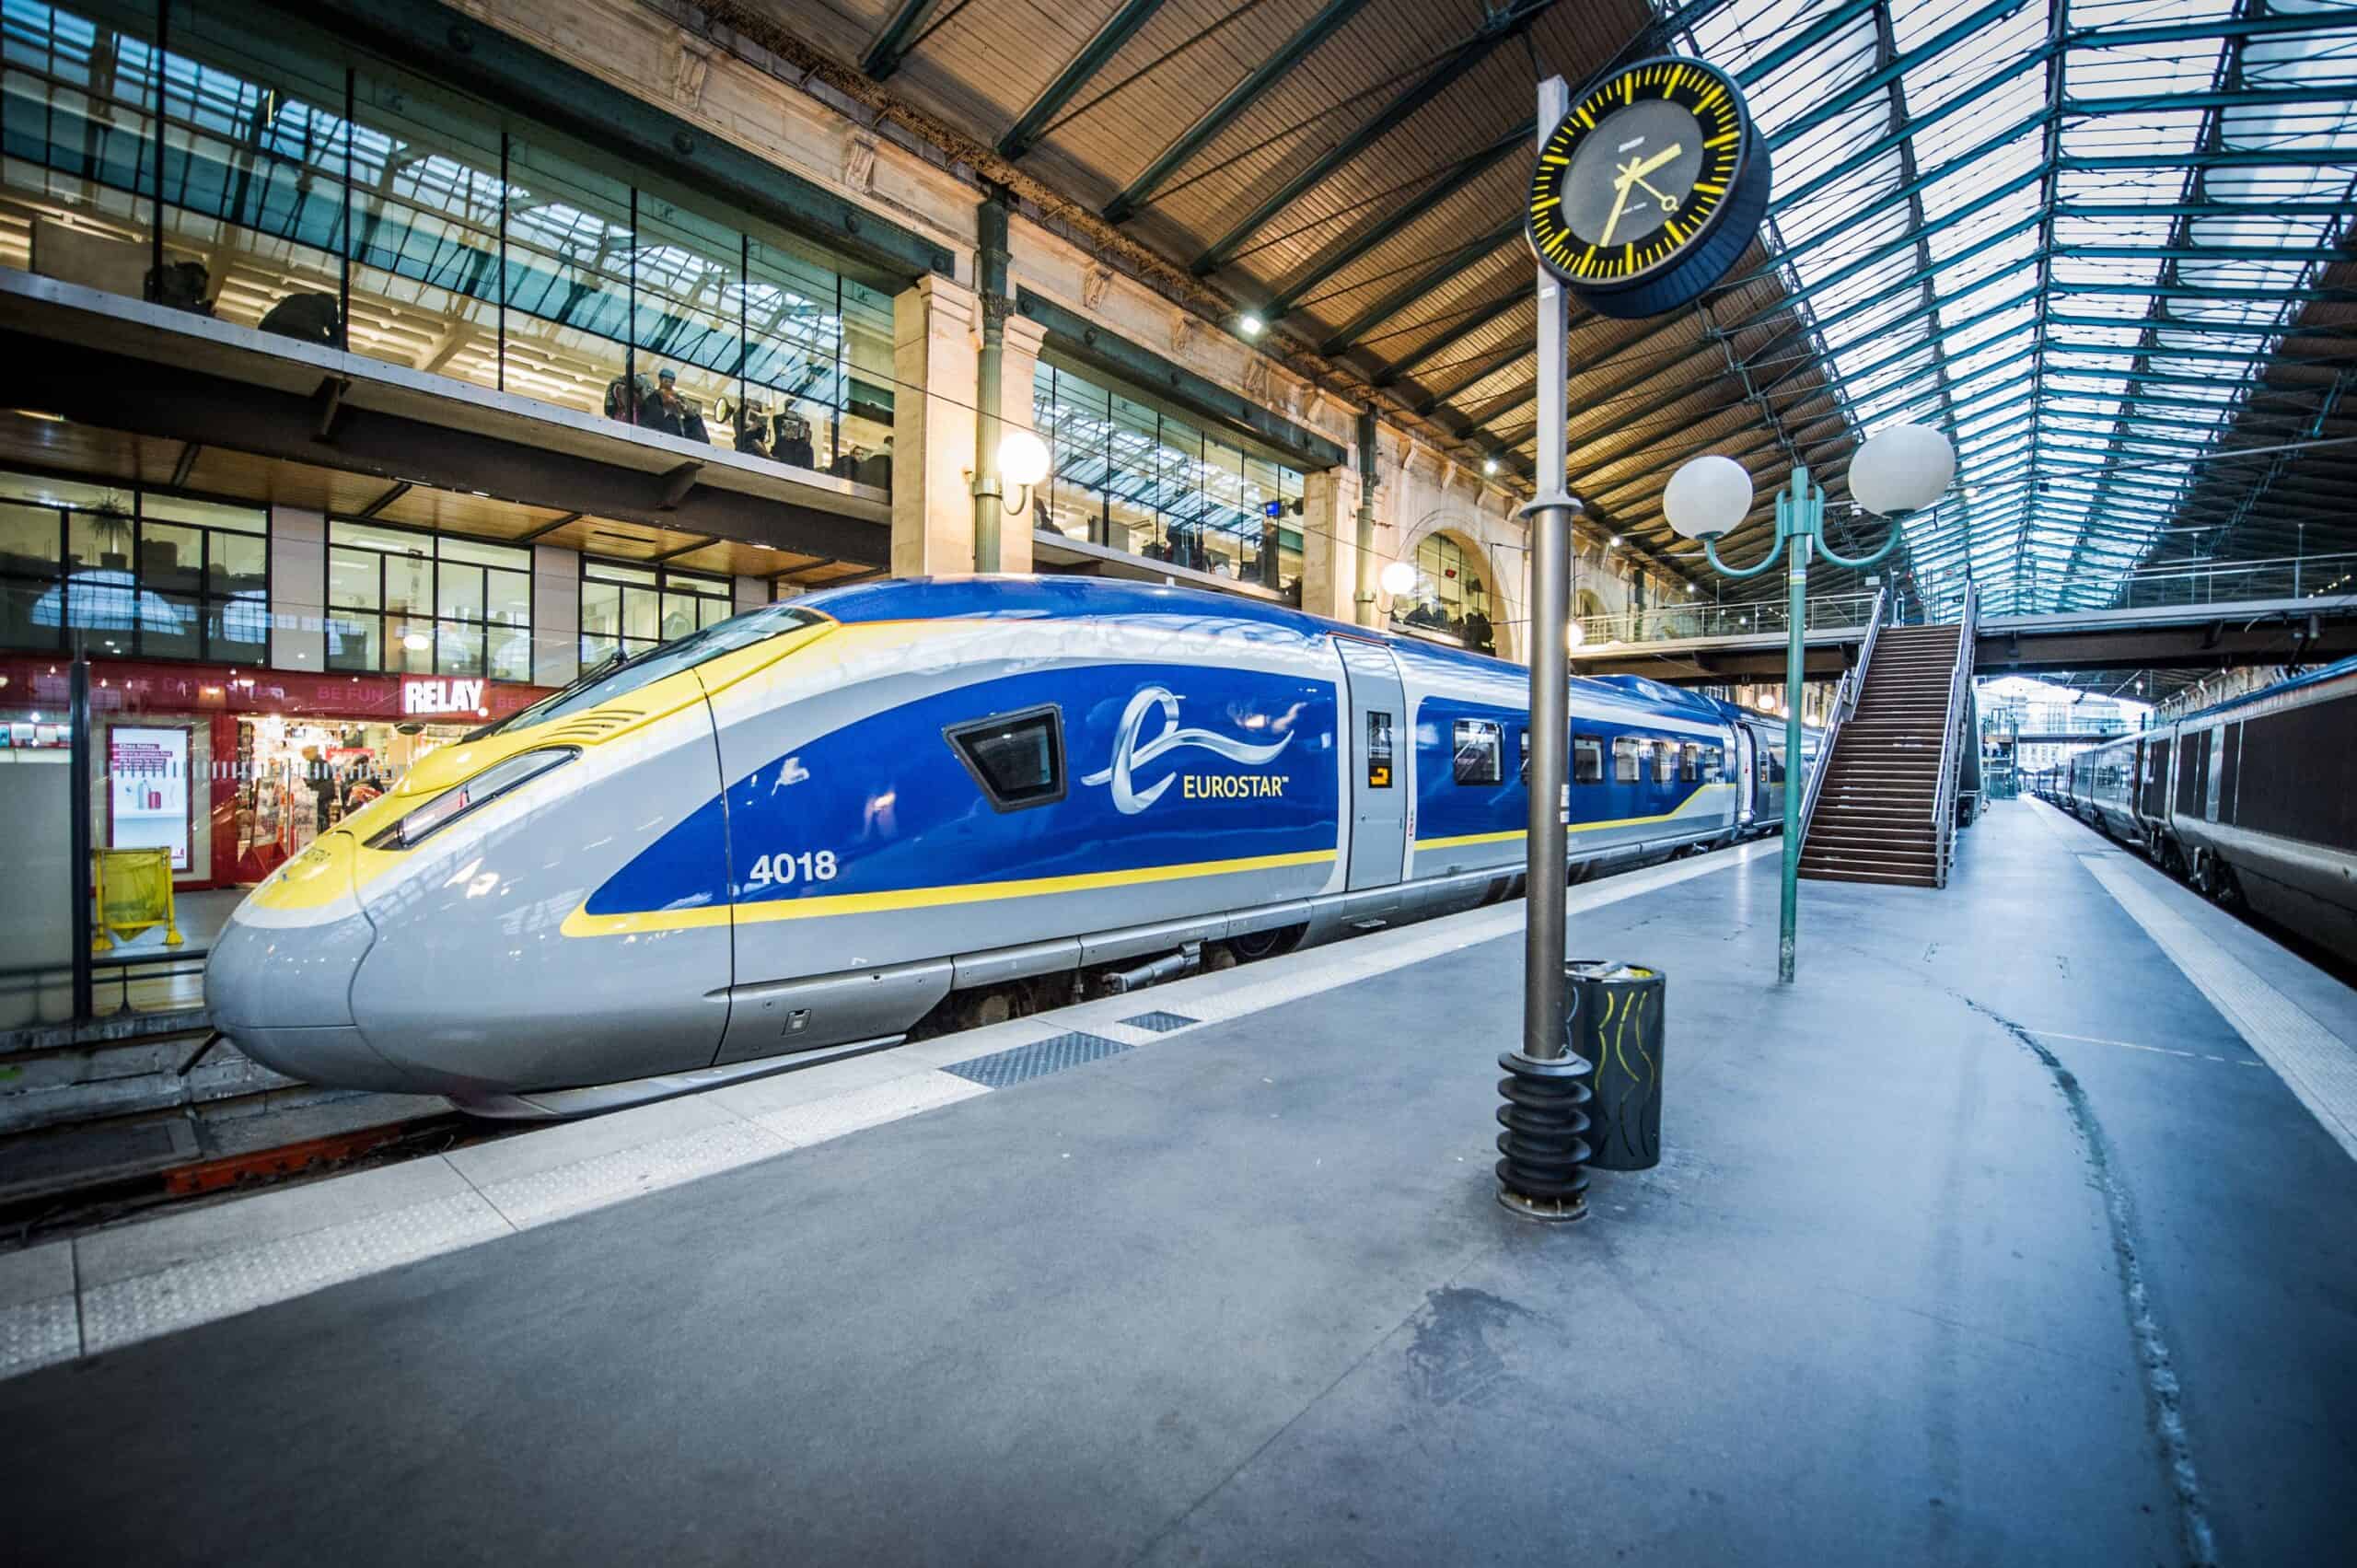 Eurostar trains from Amsterdam to London be suspended